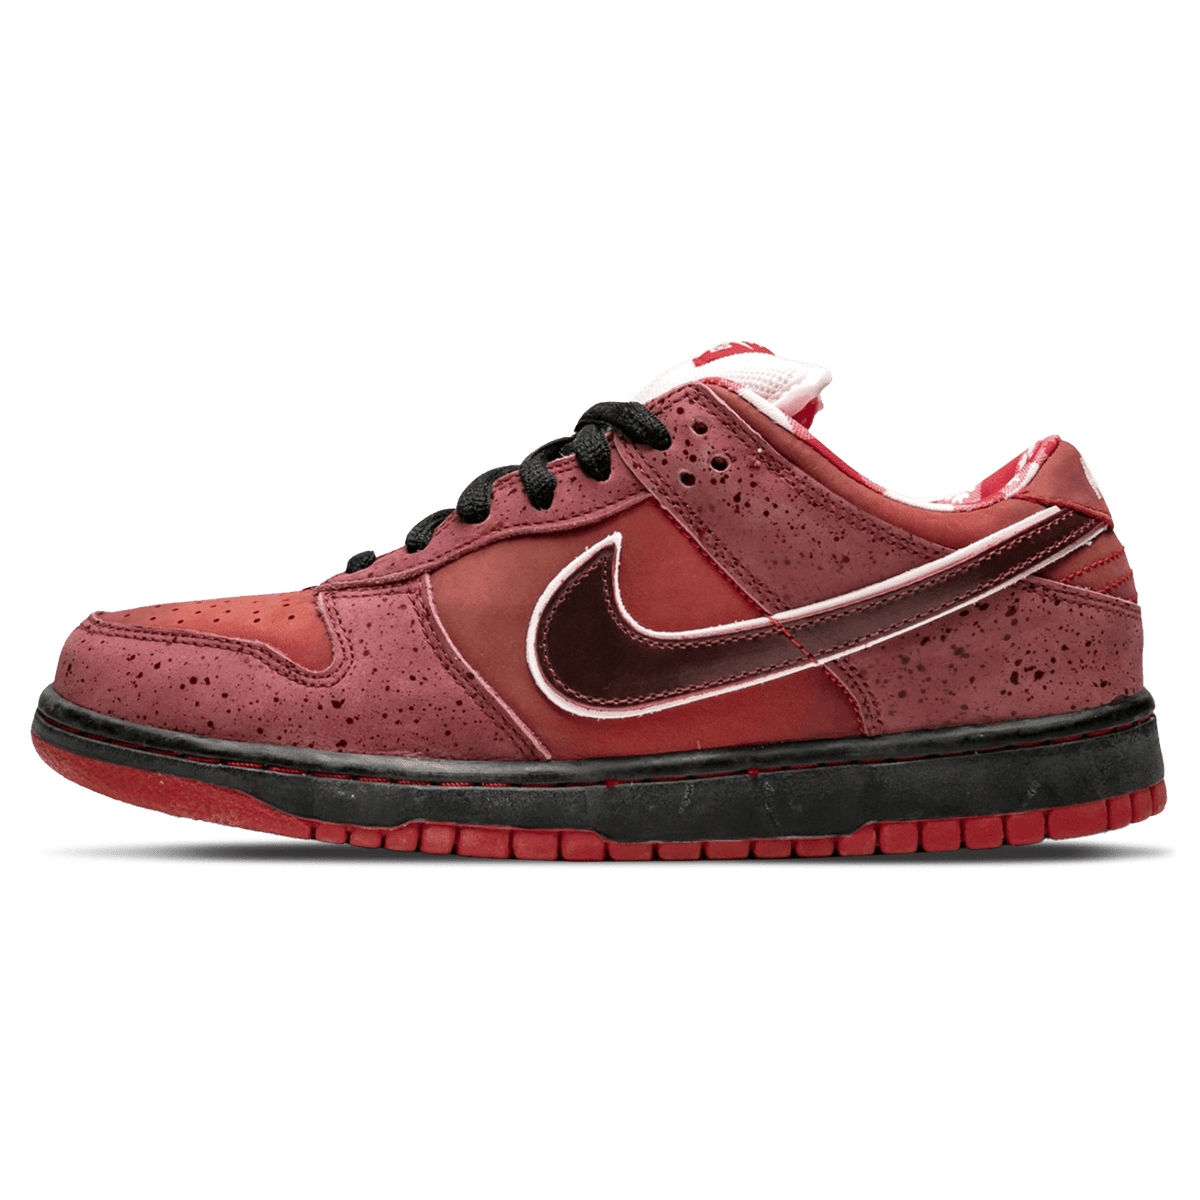 nike gravity dunk sb low red lobster 313170 661 1